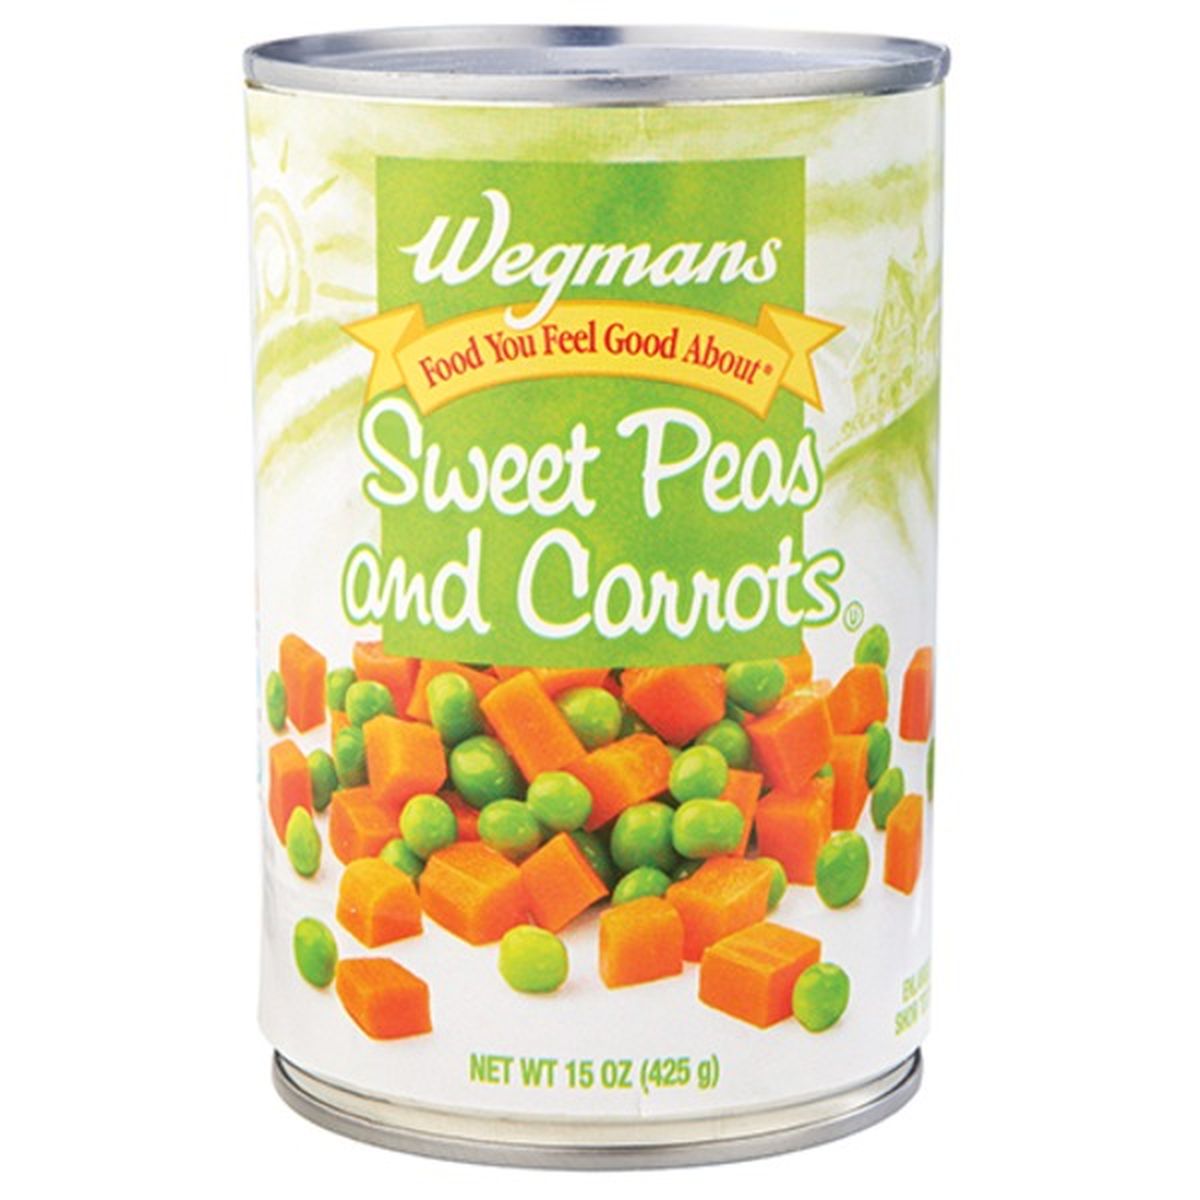 Calories in Wegmans Sweet Peas and Carrots